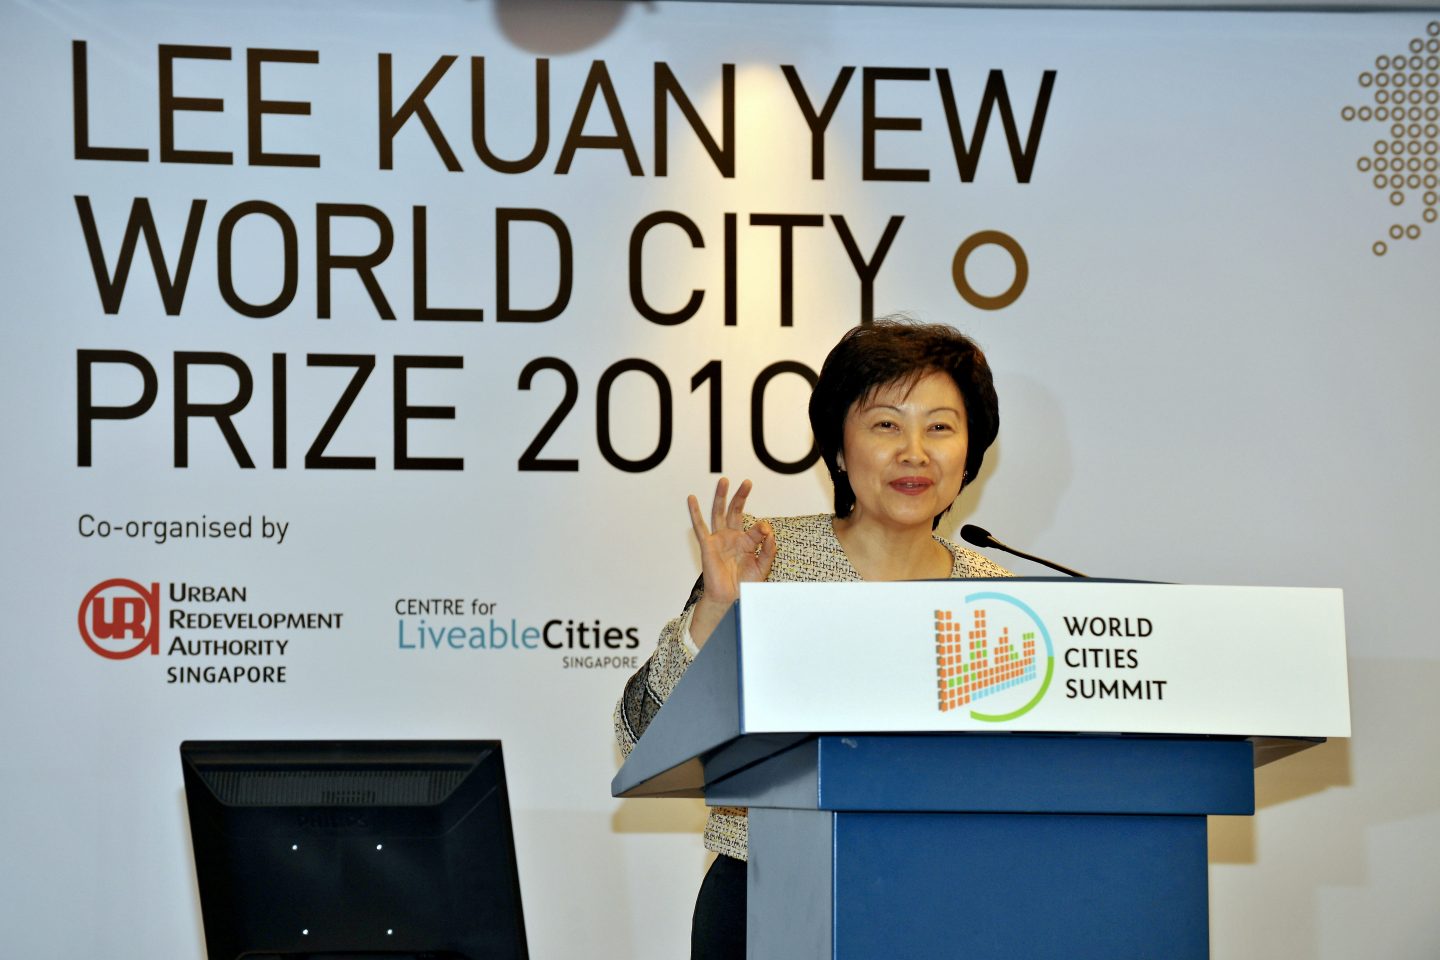 Announcing the winner of the Lee Kuan Yew World City Prize 2010. The biennial international award honours cities for outstanding creations of liveable, vibrant and sustainable urban communities. Dr Cheong conceptualised the  award in 2008 with her colleagues at URA, and is currently the Chairman of the nominating committee for the Prize.